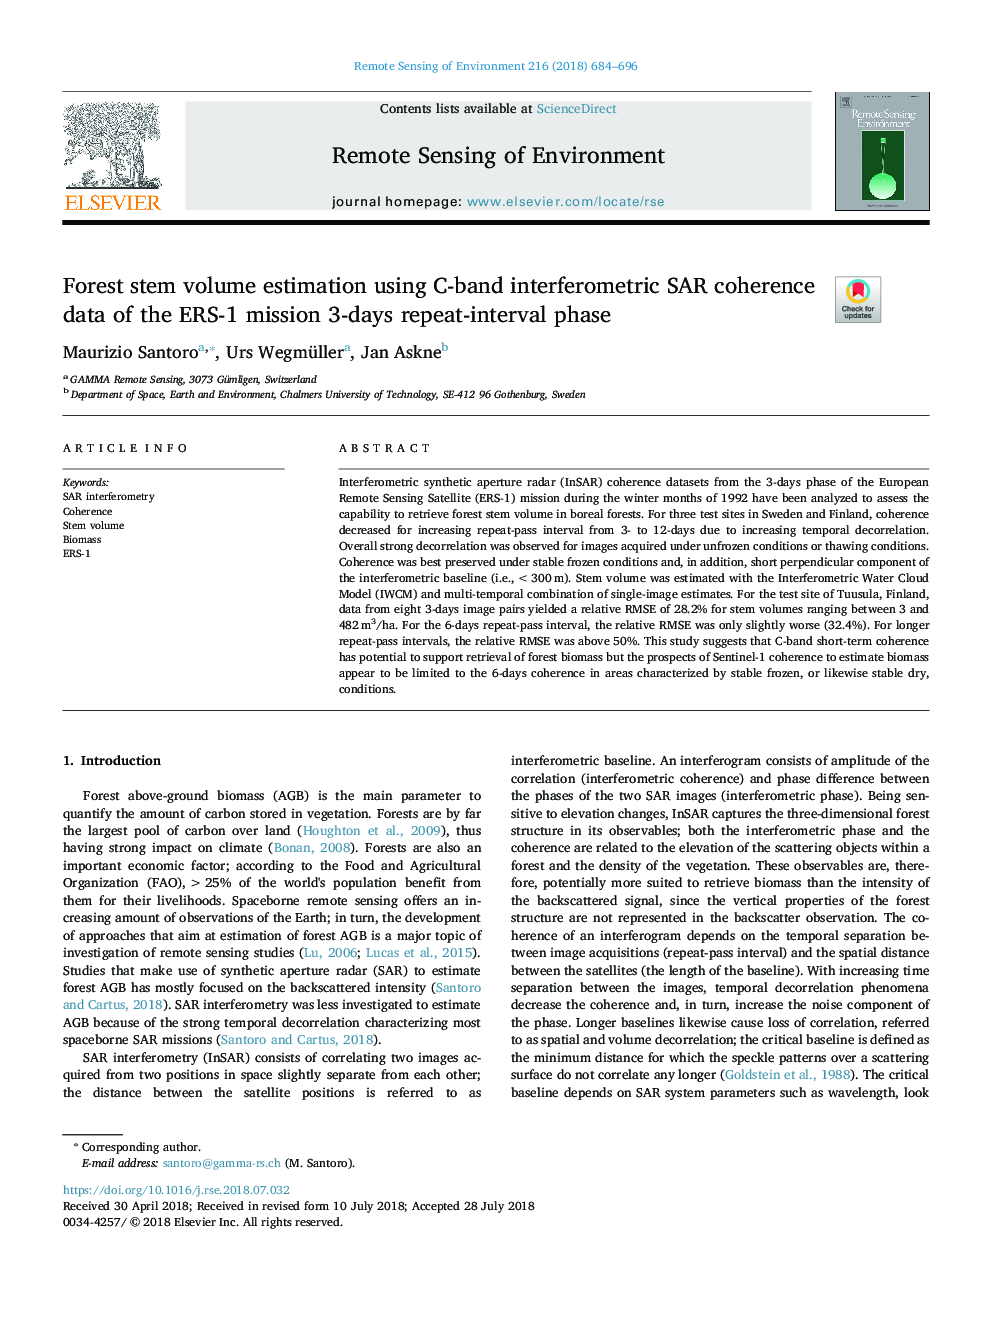 Forest stem volume estimation using C-band interferometric SAR coherence data of the ERS-1 mission 3-days repeat-interval phase